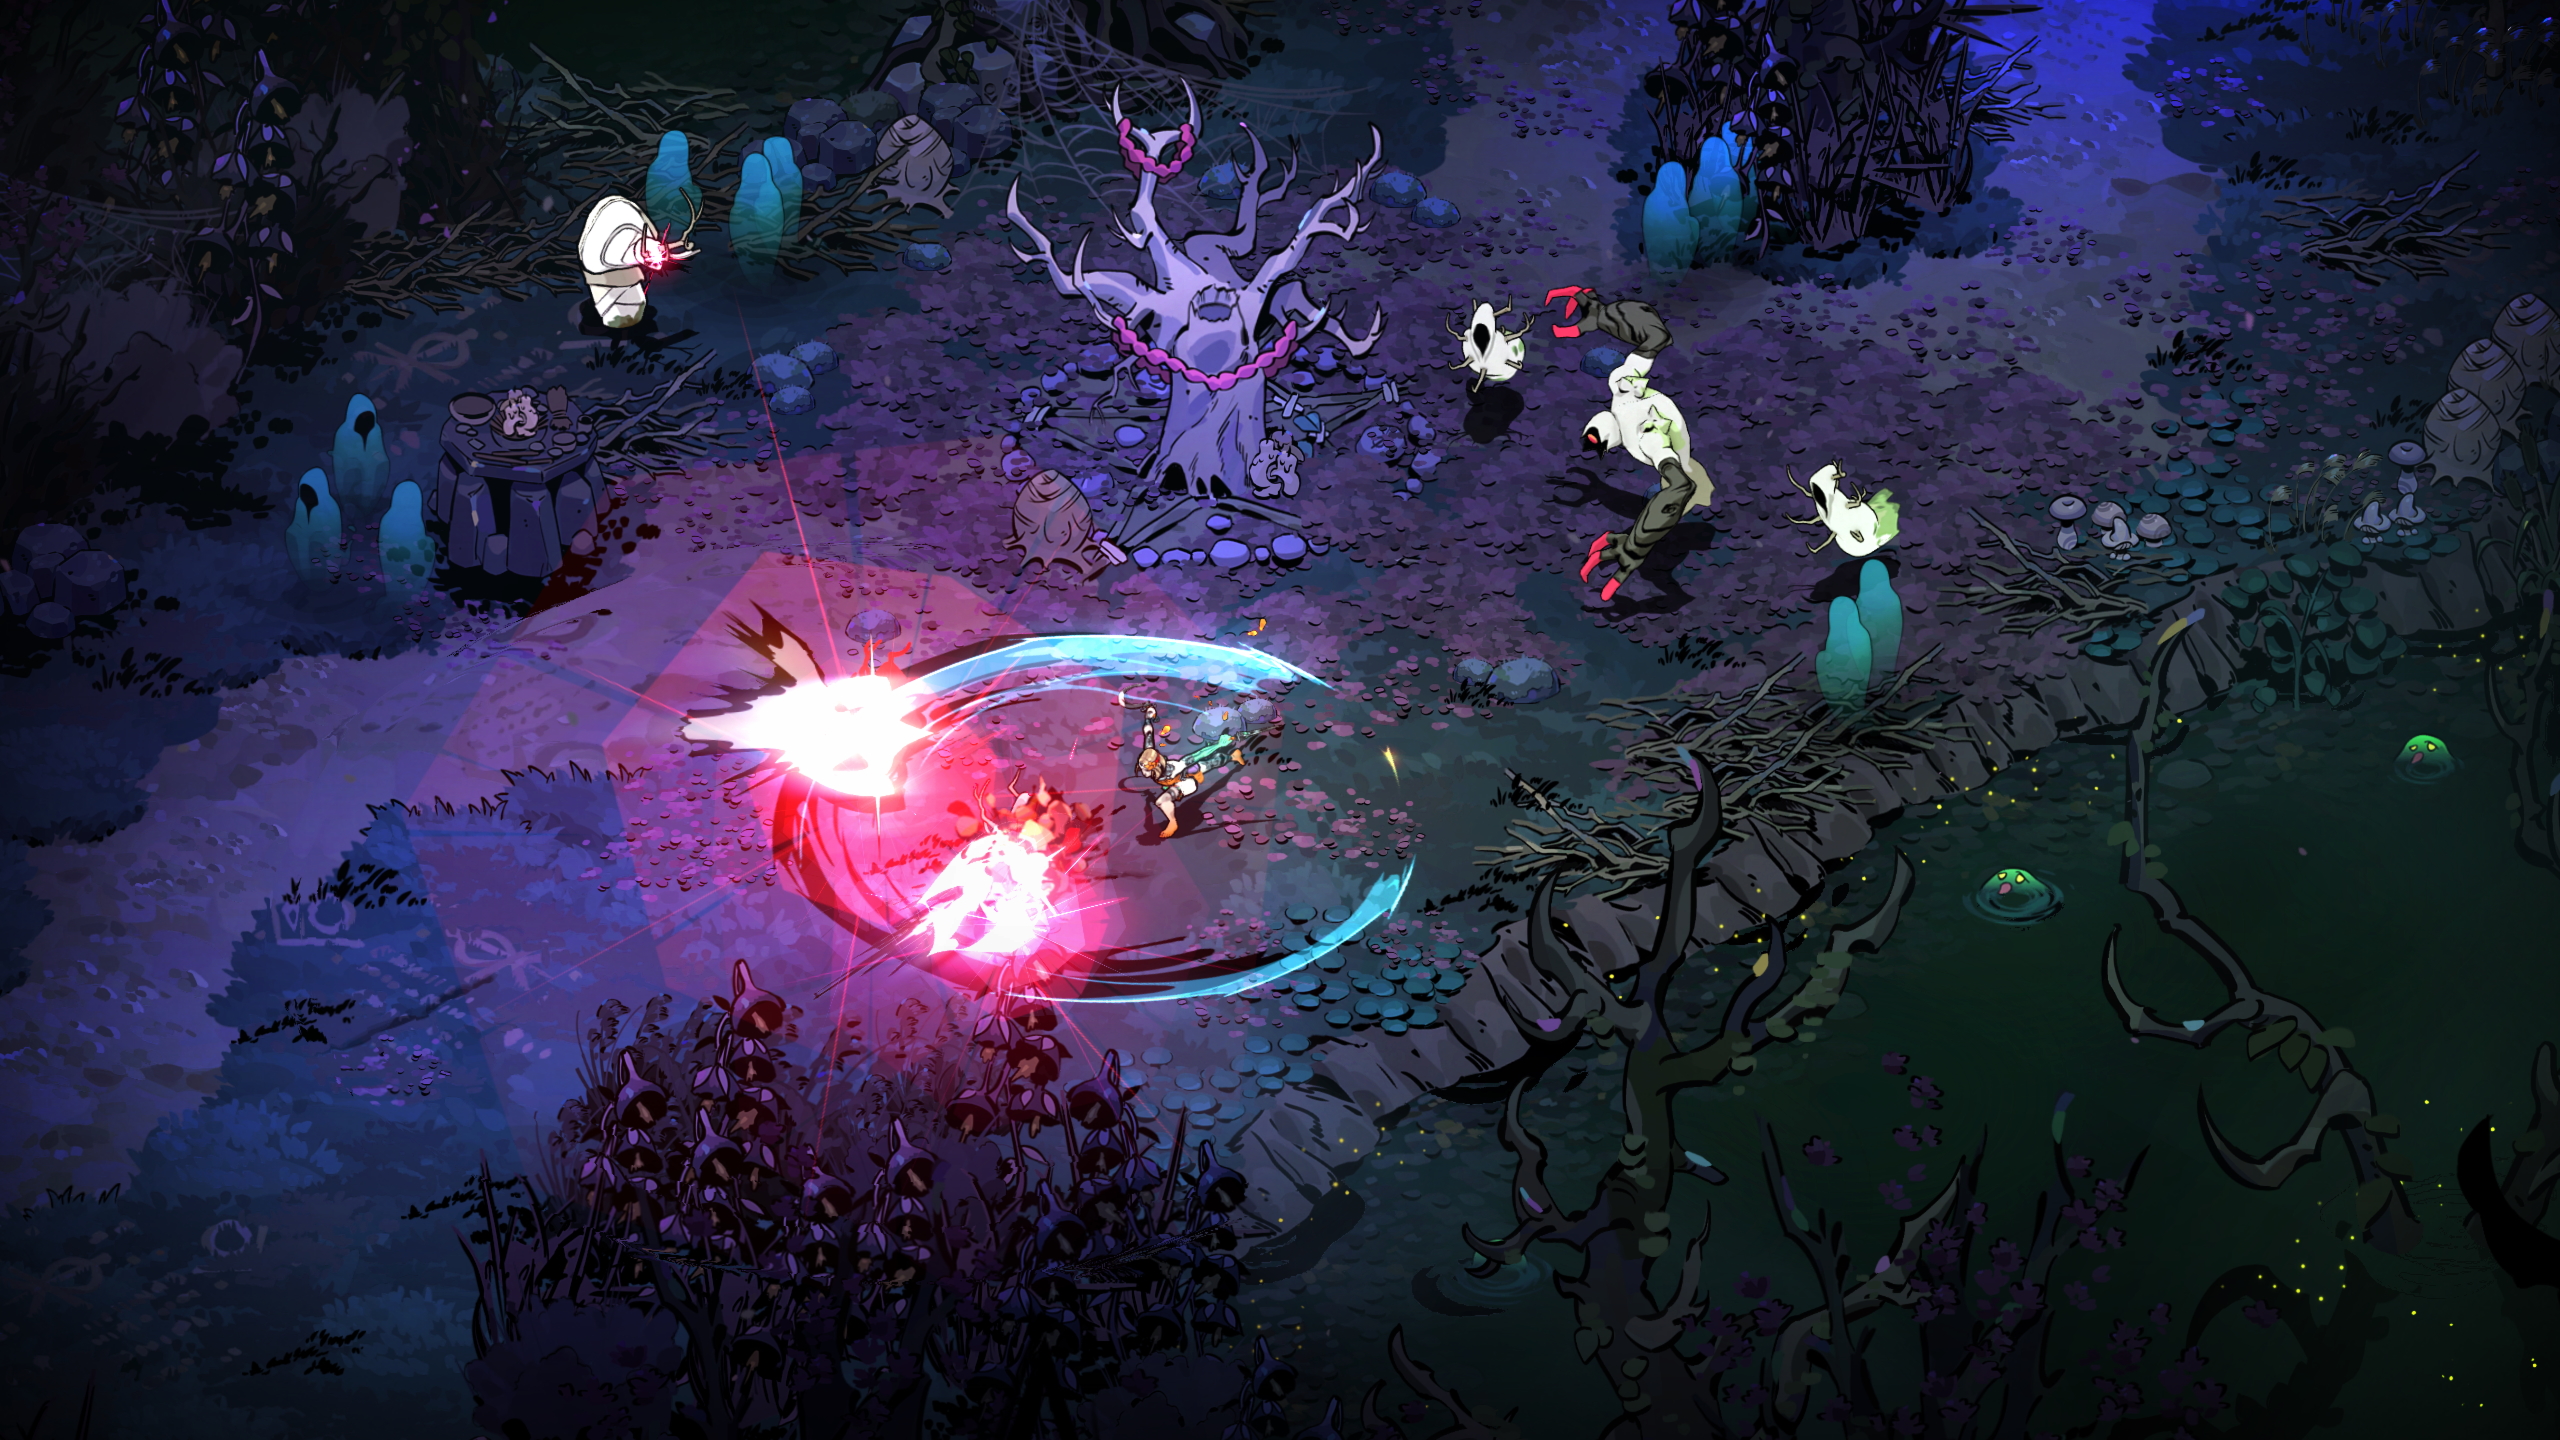 Steam Sale: Hades 50% Off - The Spectacular Roguelike For PC